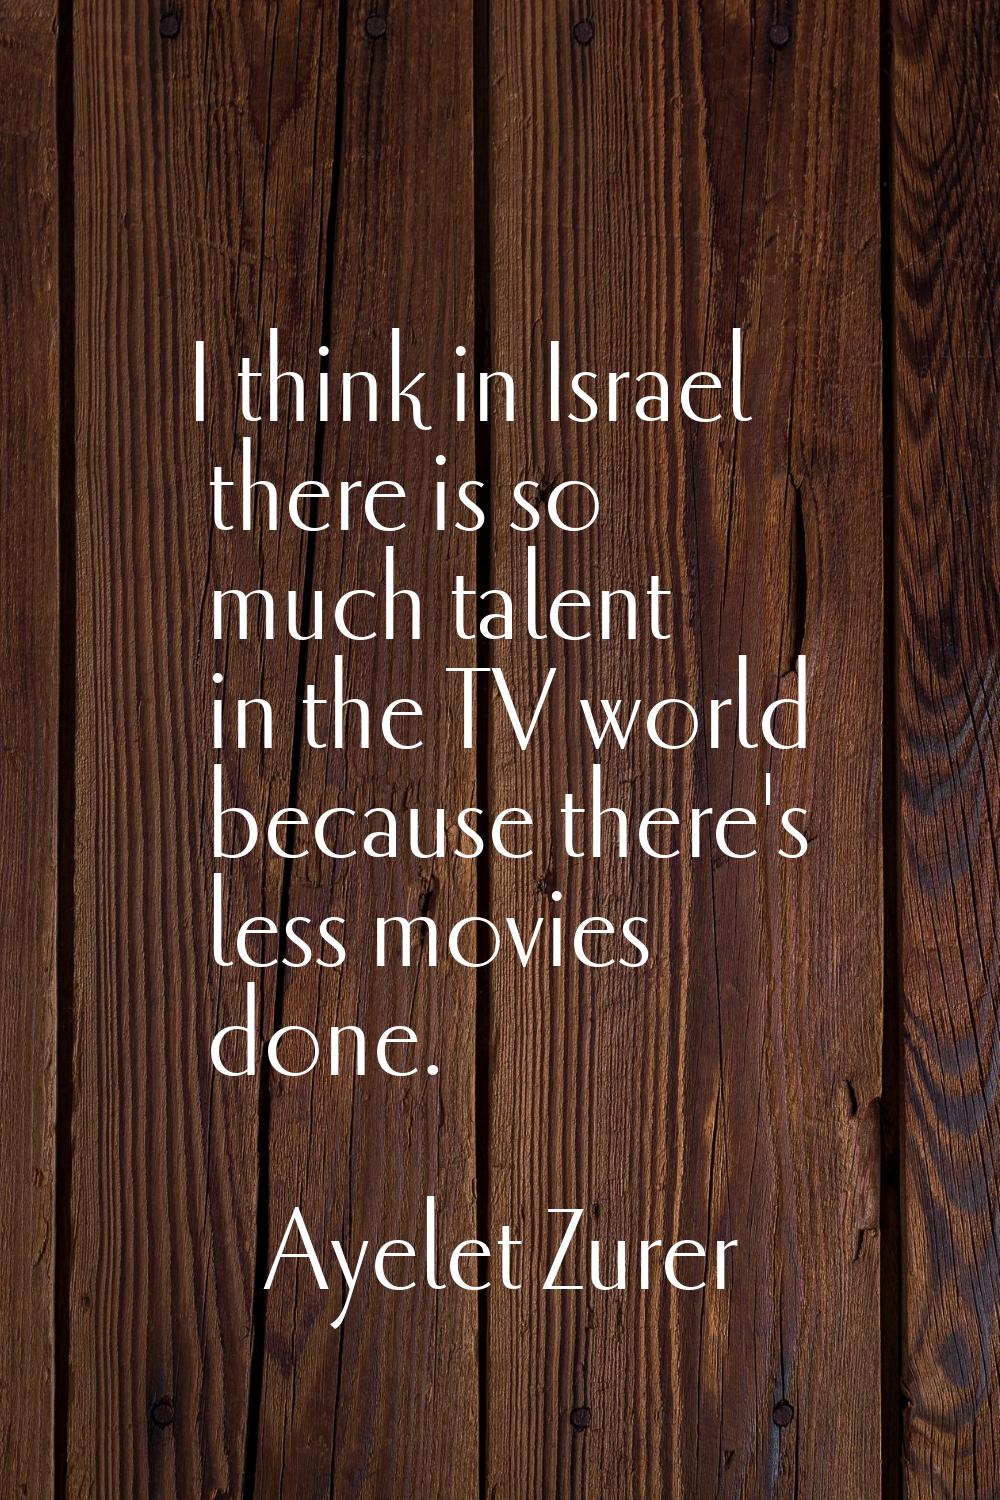 I think in Israel there is so much talent in the TV world because there's less movies done.